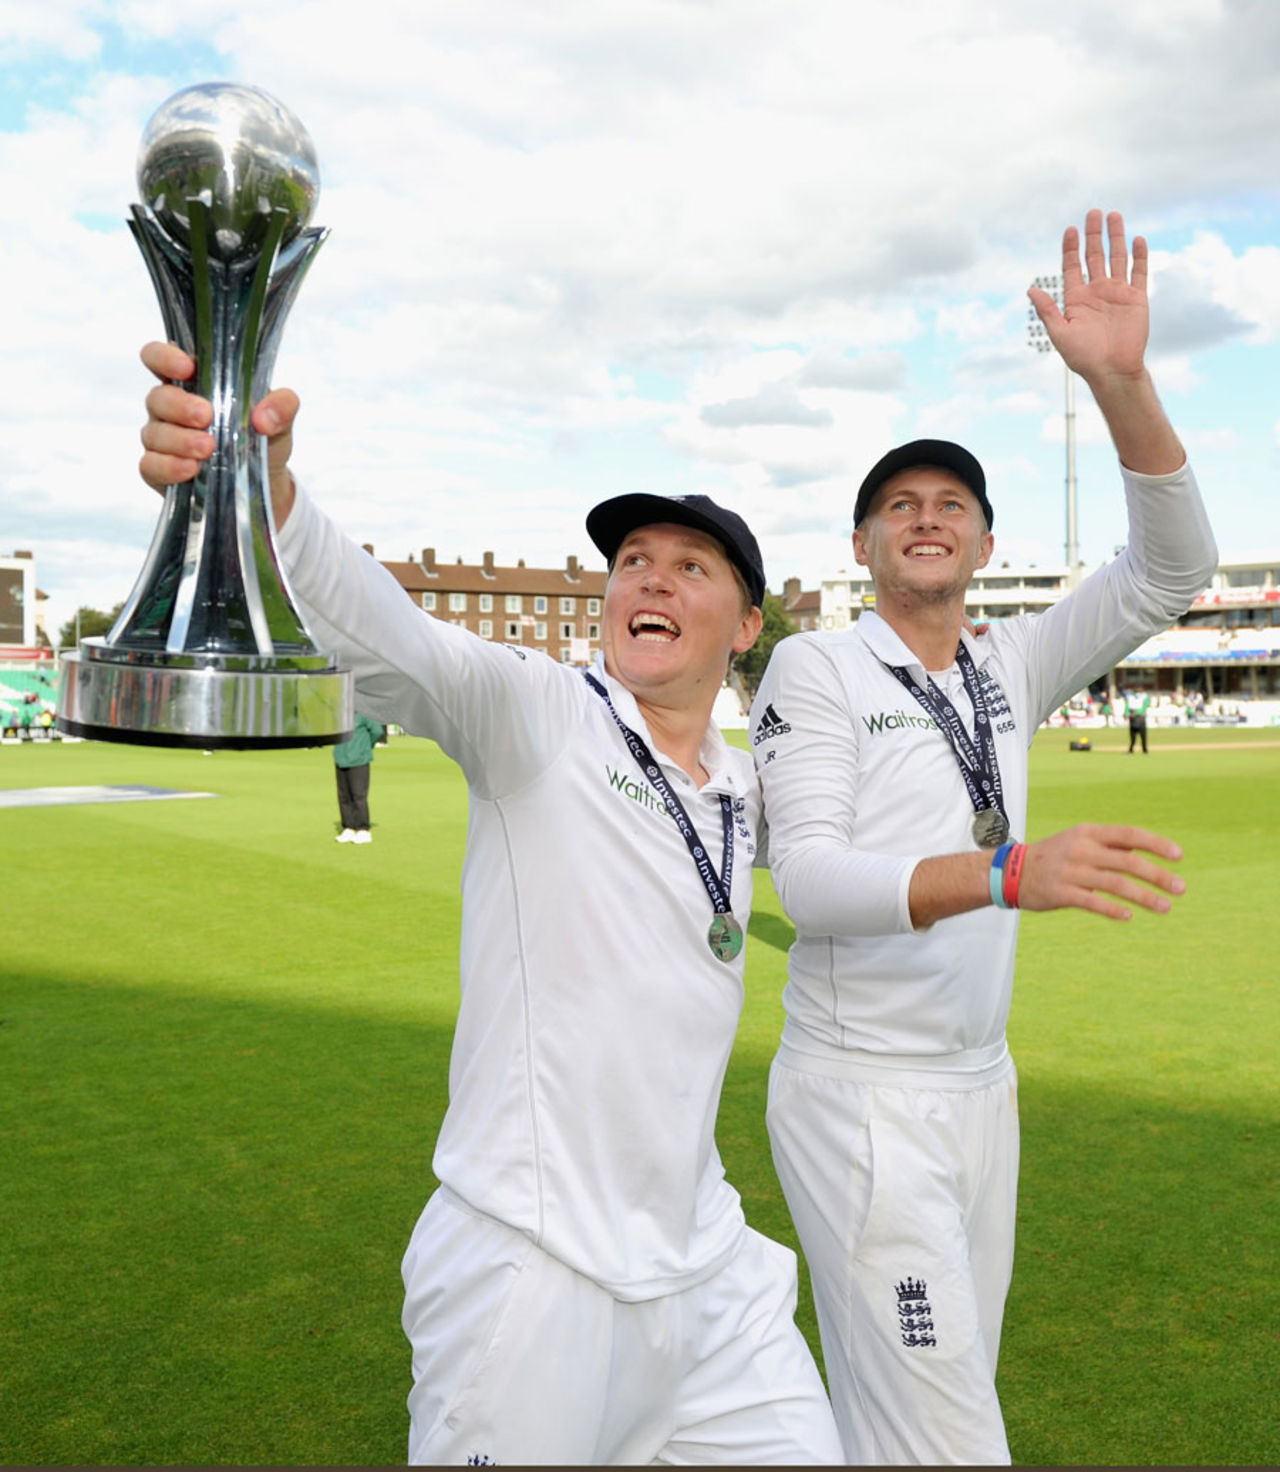 Joe Root and Gary Ballance celebrate with the series trophy, England v India, 5th Investec Test, The Oval, 3rd day, August 17, 2014